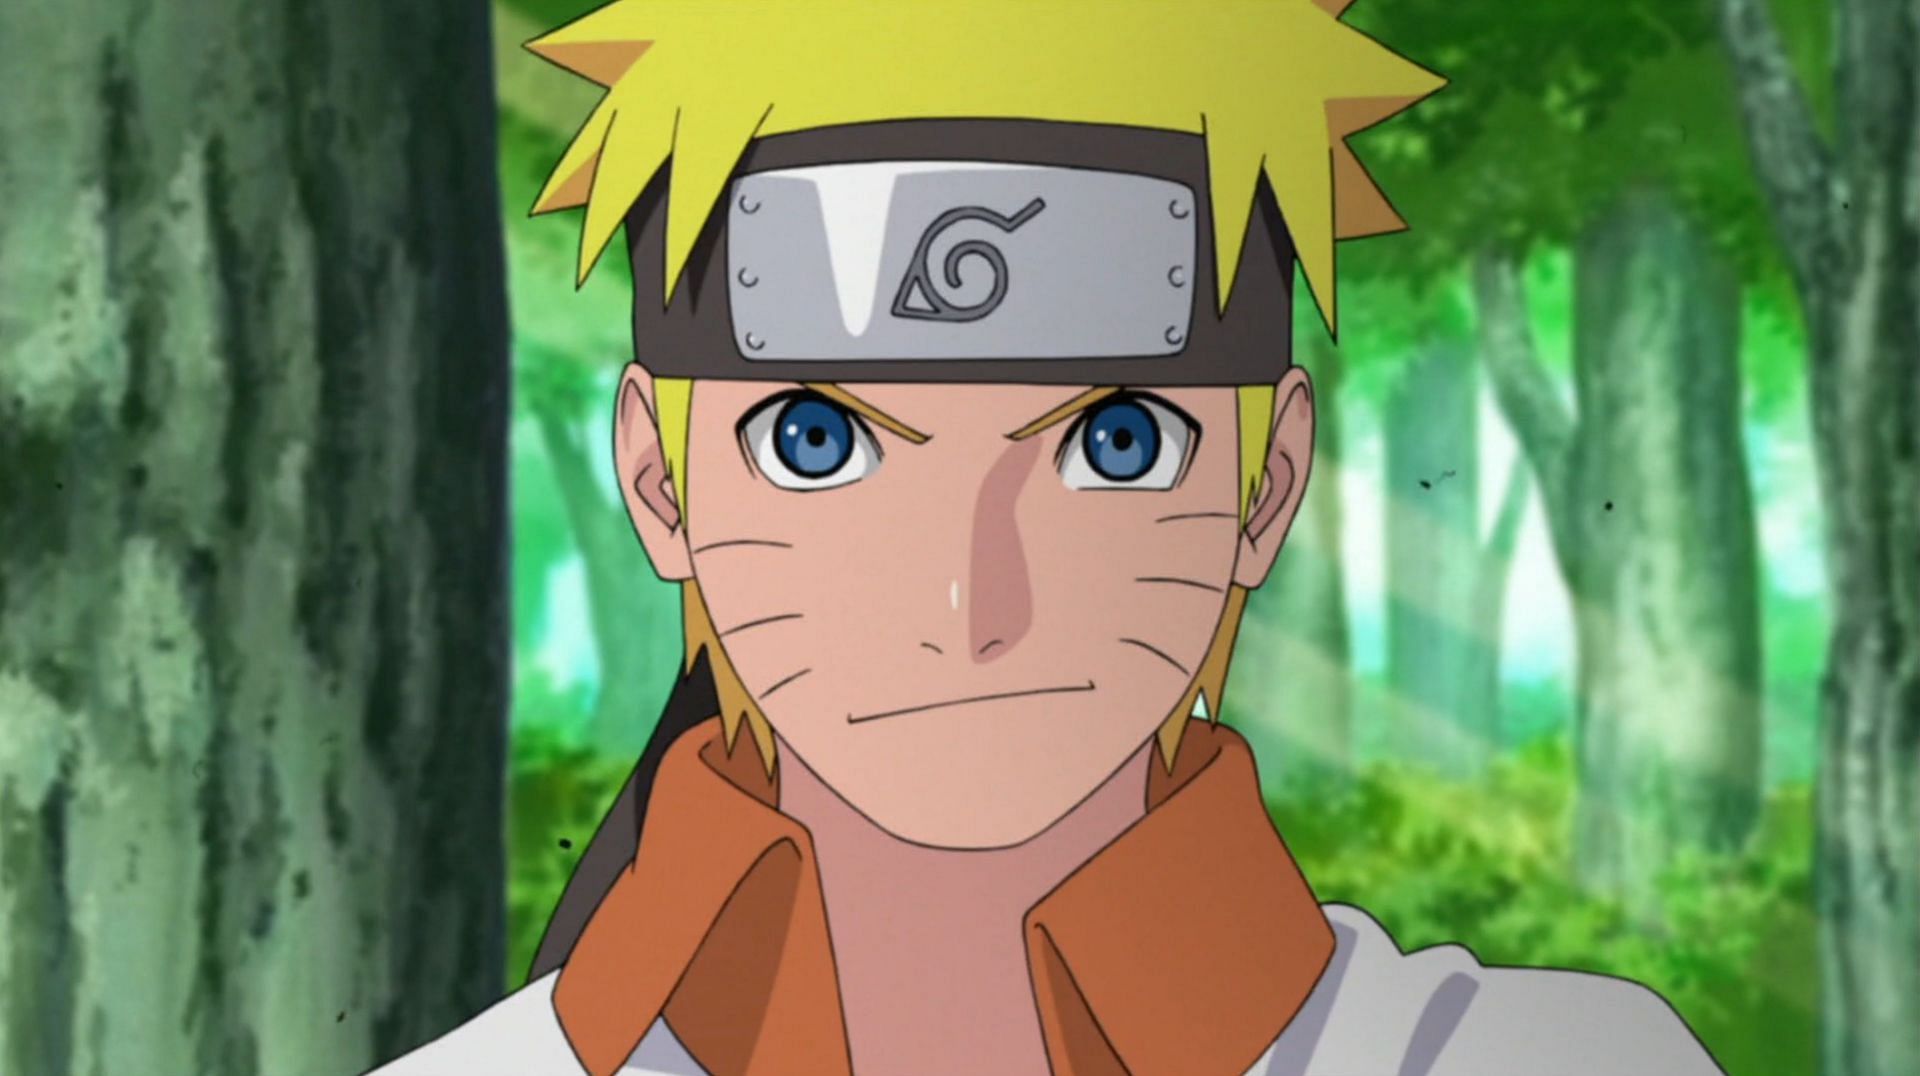 Naruto as he appears at the end of Naruto Shippuden (Image via Studio Pierrot)